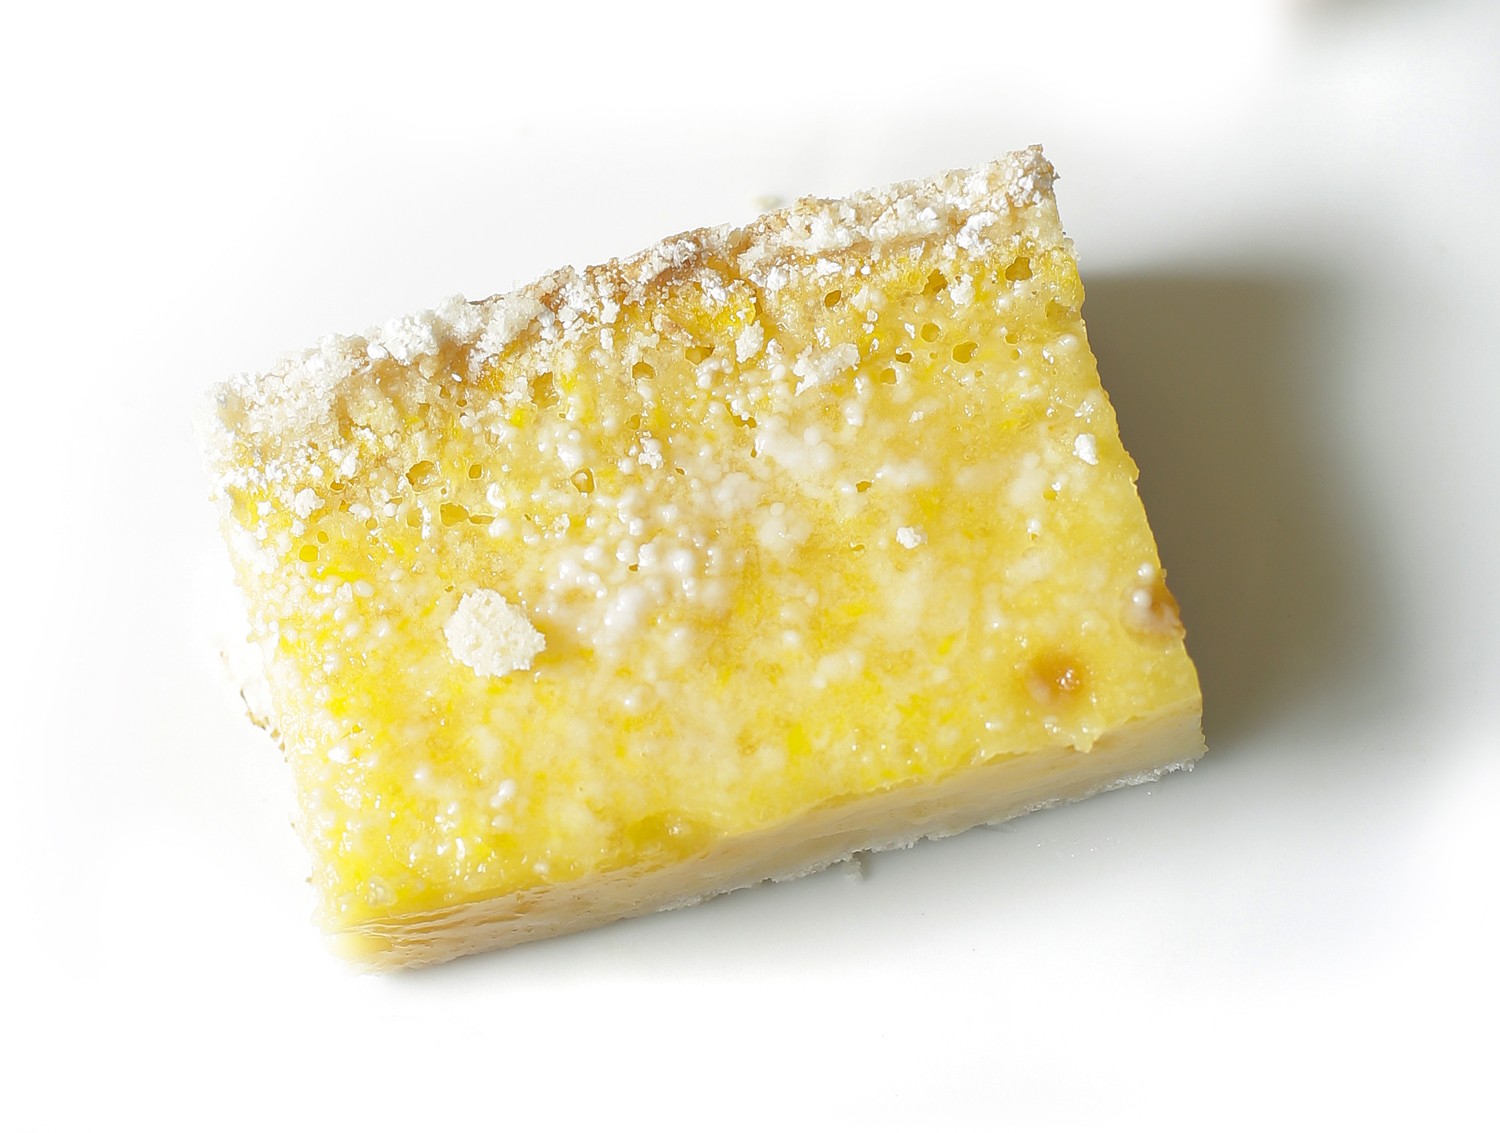 Recipes: Gluten-free lemon bars, biscuits, and chocolate chip cookies